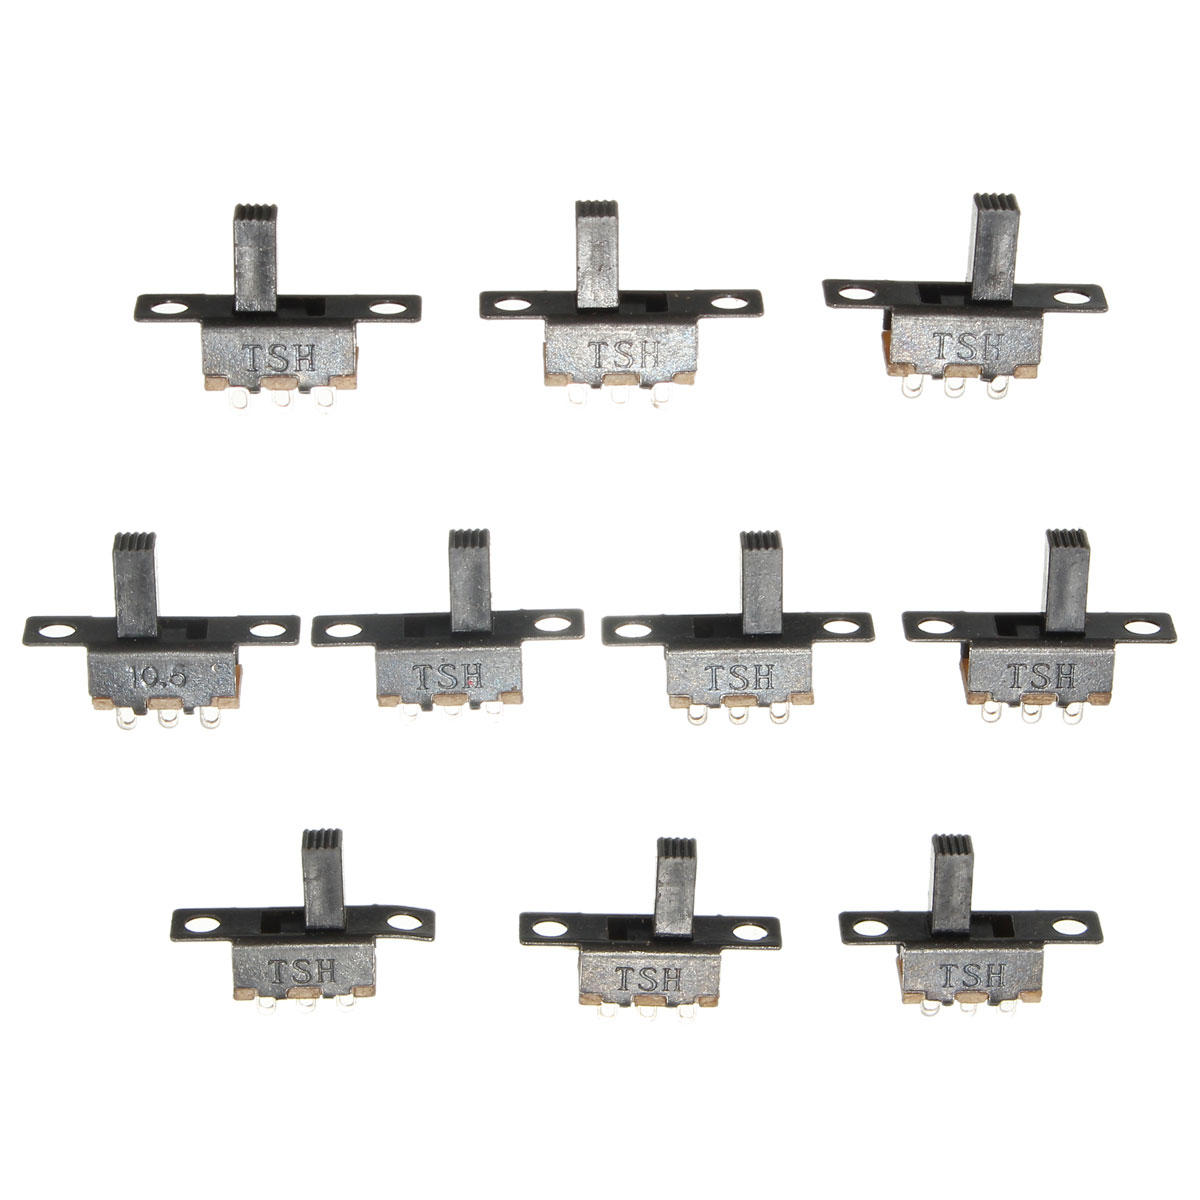 100Pcs Black Mini Size SPDT Slide Switches On-Off 100V 2A DIY Material Toggle Switch